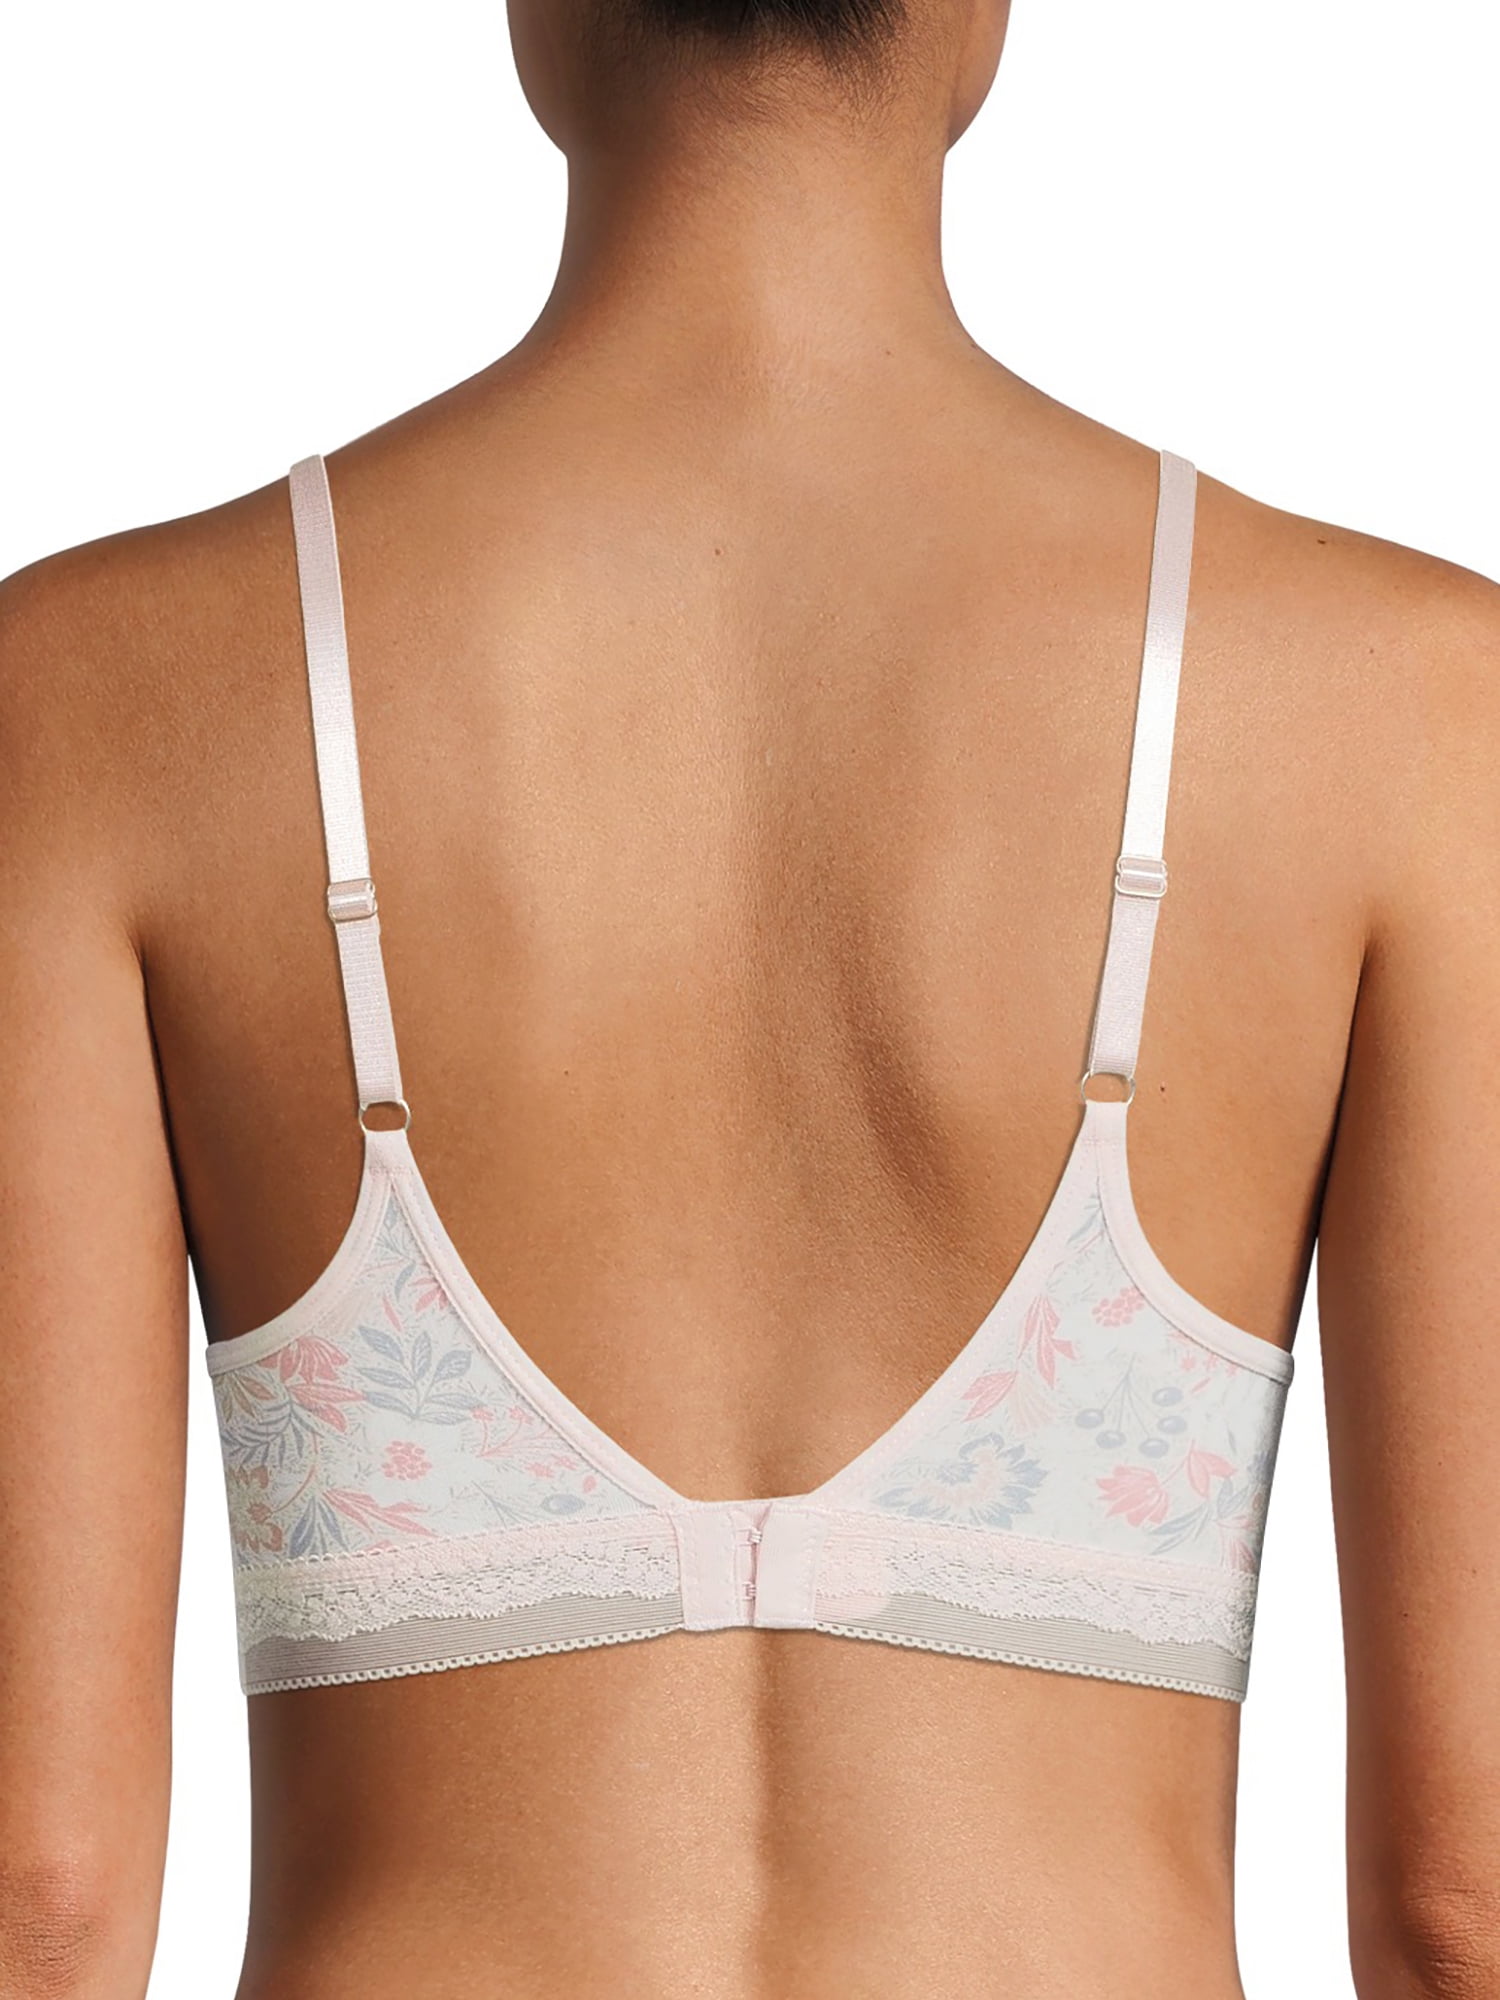 Buy Jessica Simpson womens 2 p brushed micro bra with galoon lace